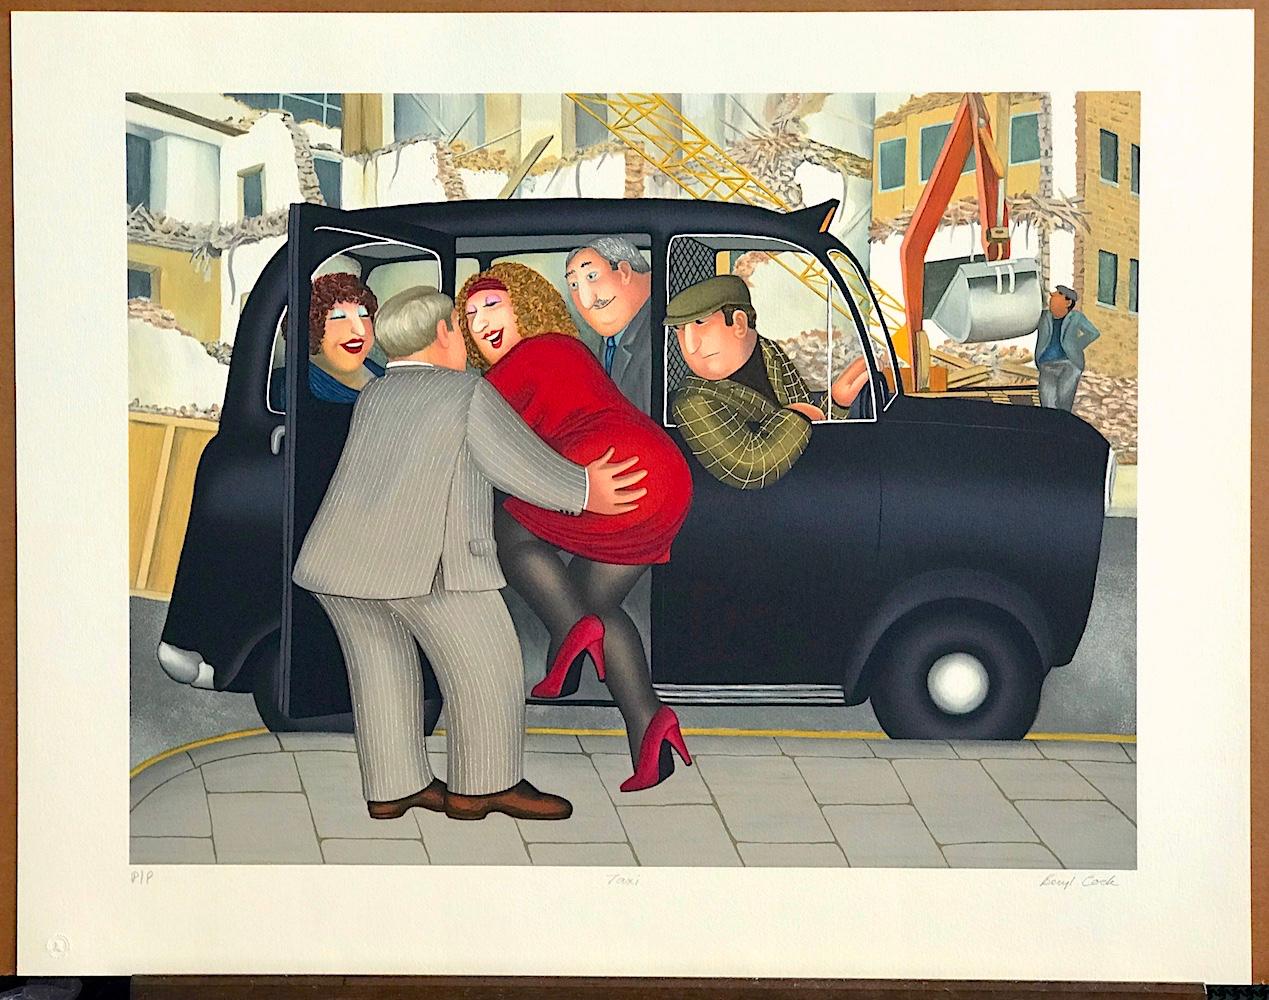 TAXI Signed Lithograph, Lady in Red, London Black Cab, British Humor - Brown Landscape Print by Beryl Cook